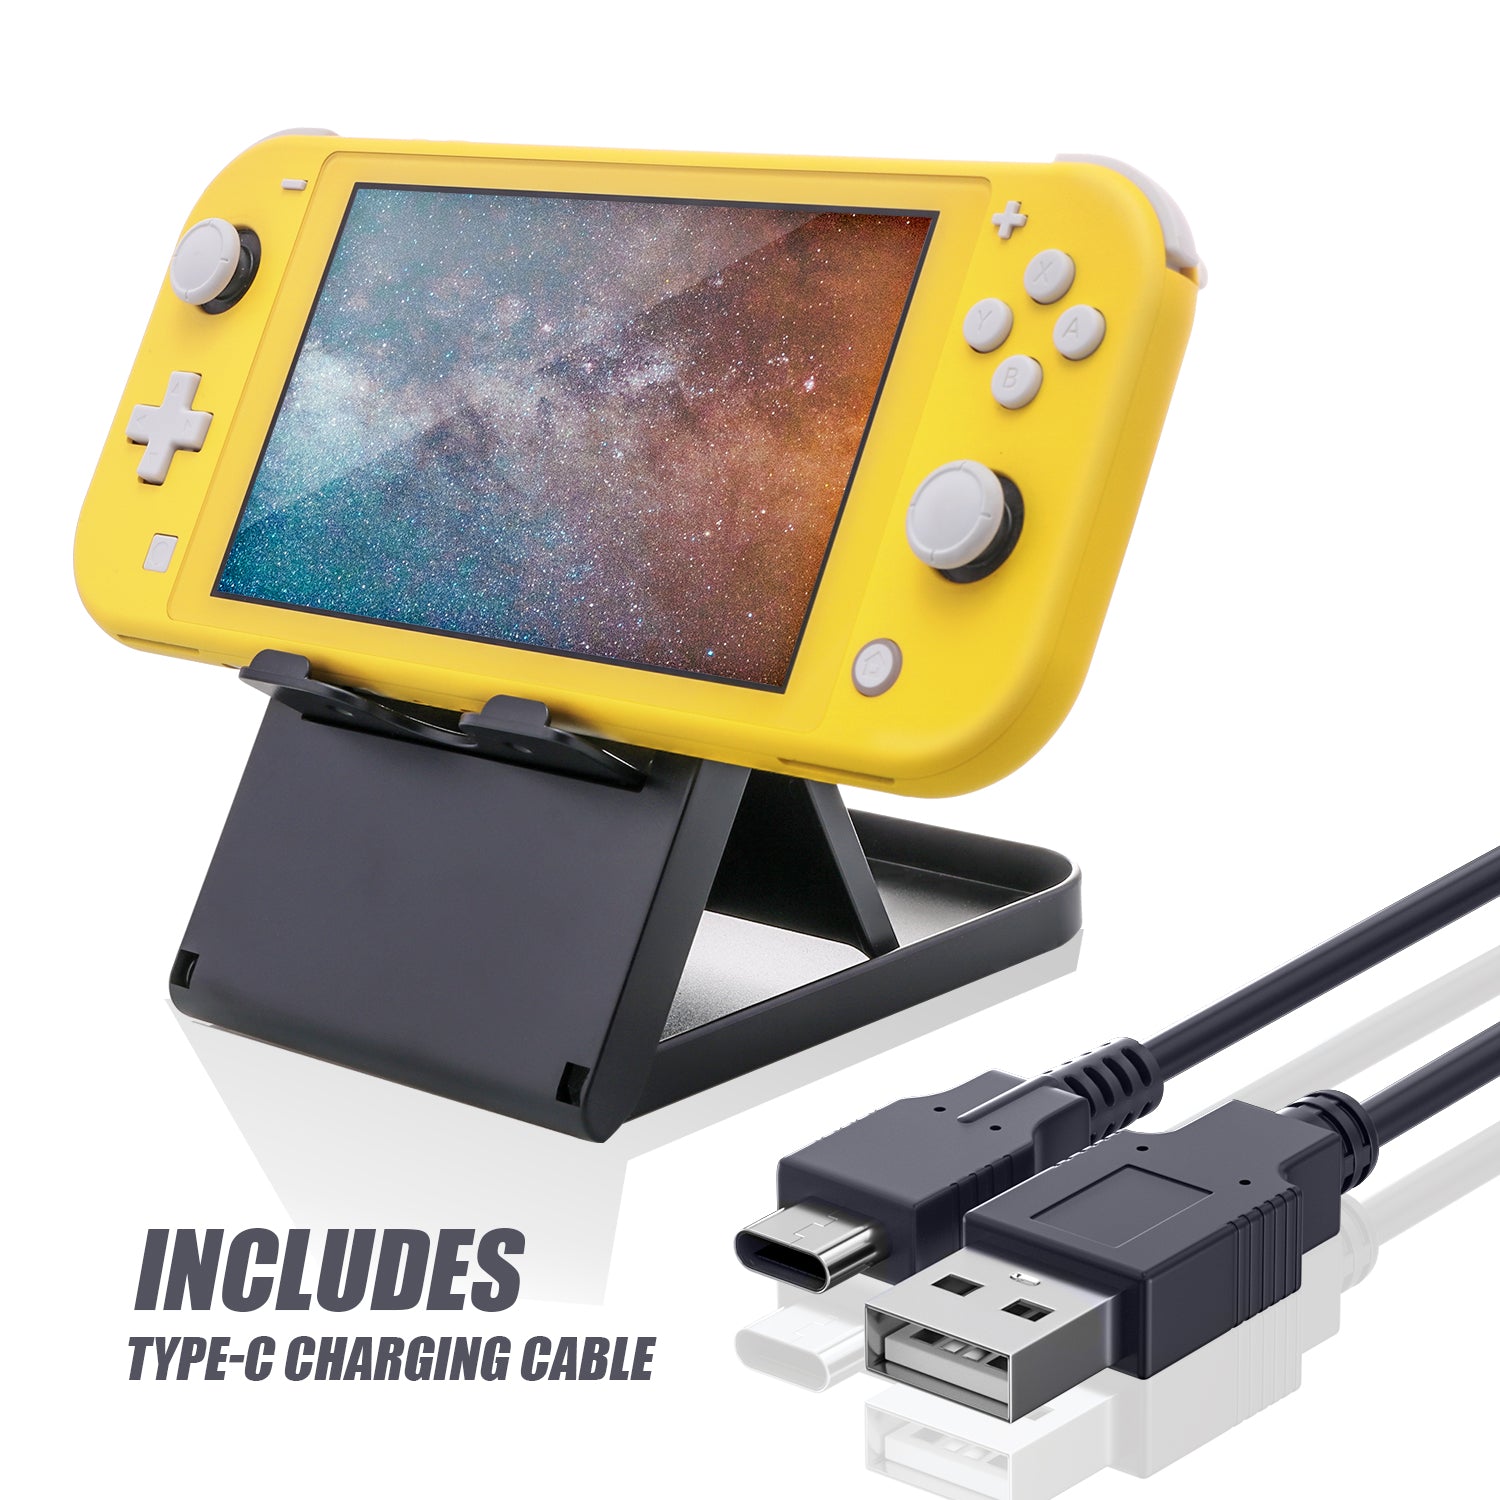  ECHZOVE Switch lite Holder, Adjustable Stand for